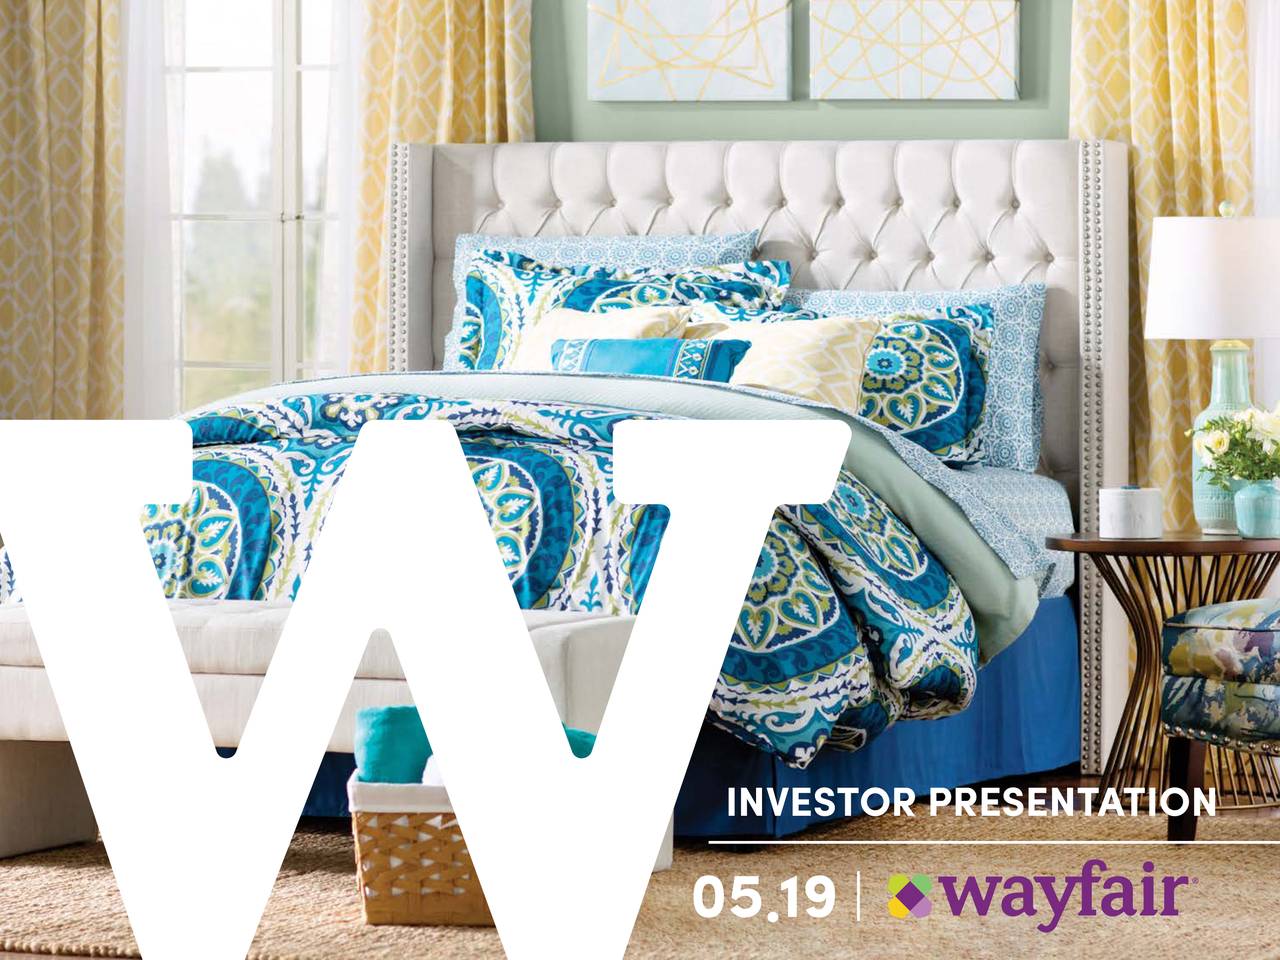 Wayfair Inc. 2019 Q1 Results Earnings Call Slides (NYSEW